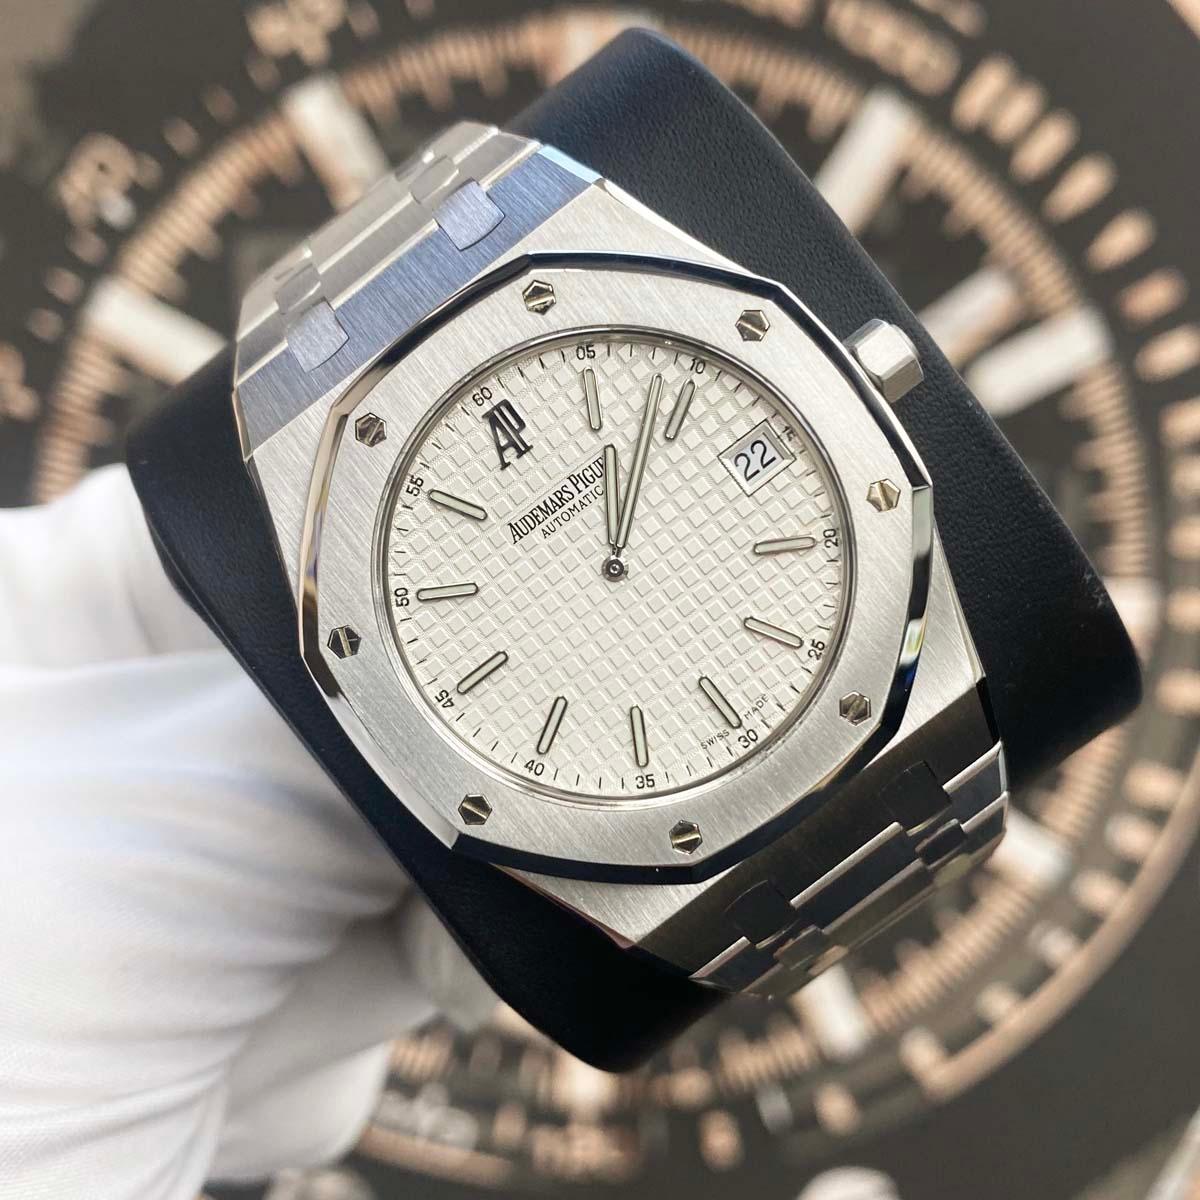 Audemars Piguet Royal Oak "Jumbo" Extra-Thin 39mm 15202ST.OO.0944ST.01 White Dial Pre-Owned - Gotham Trading 